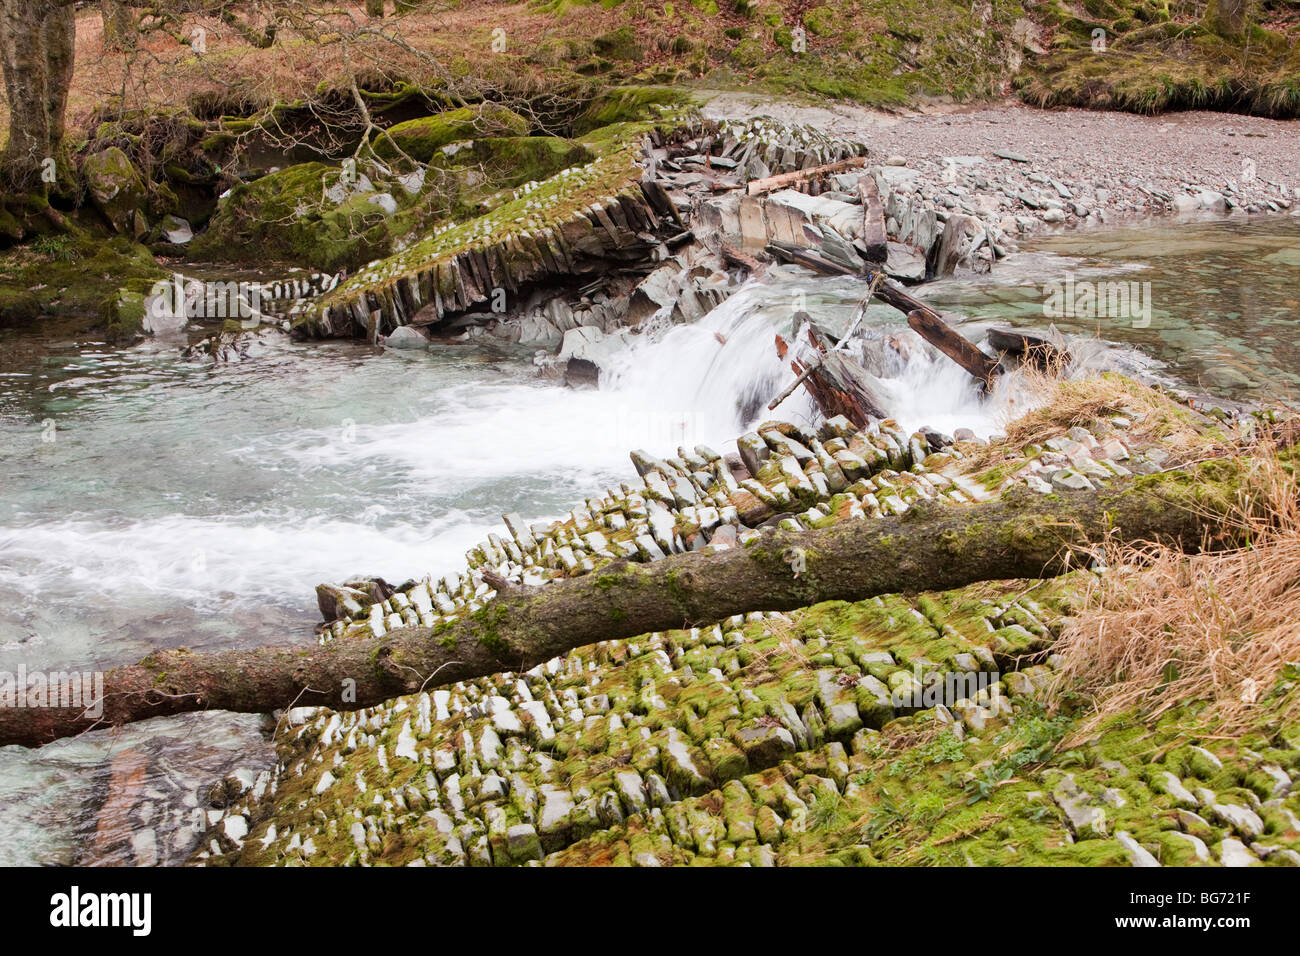 A weir on the River Brathay, Lake District, that was destroyed by the floods that devastated Cumbria in November 2009 Stock Photo